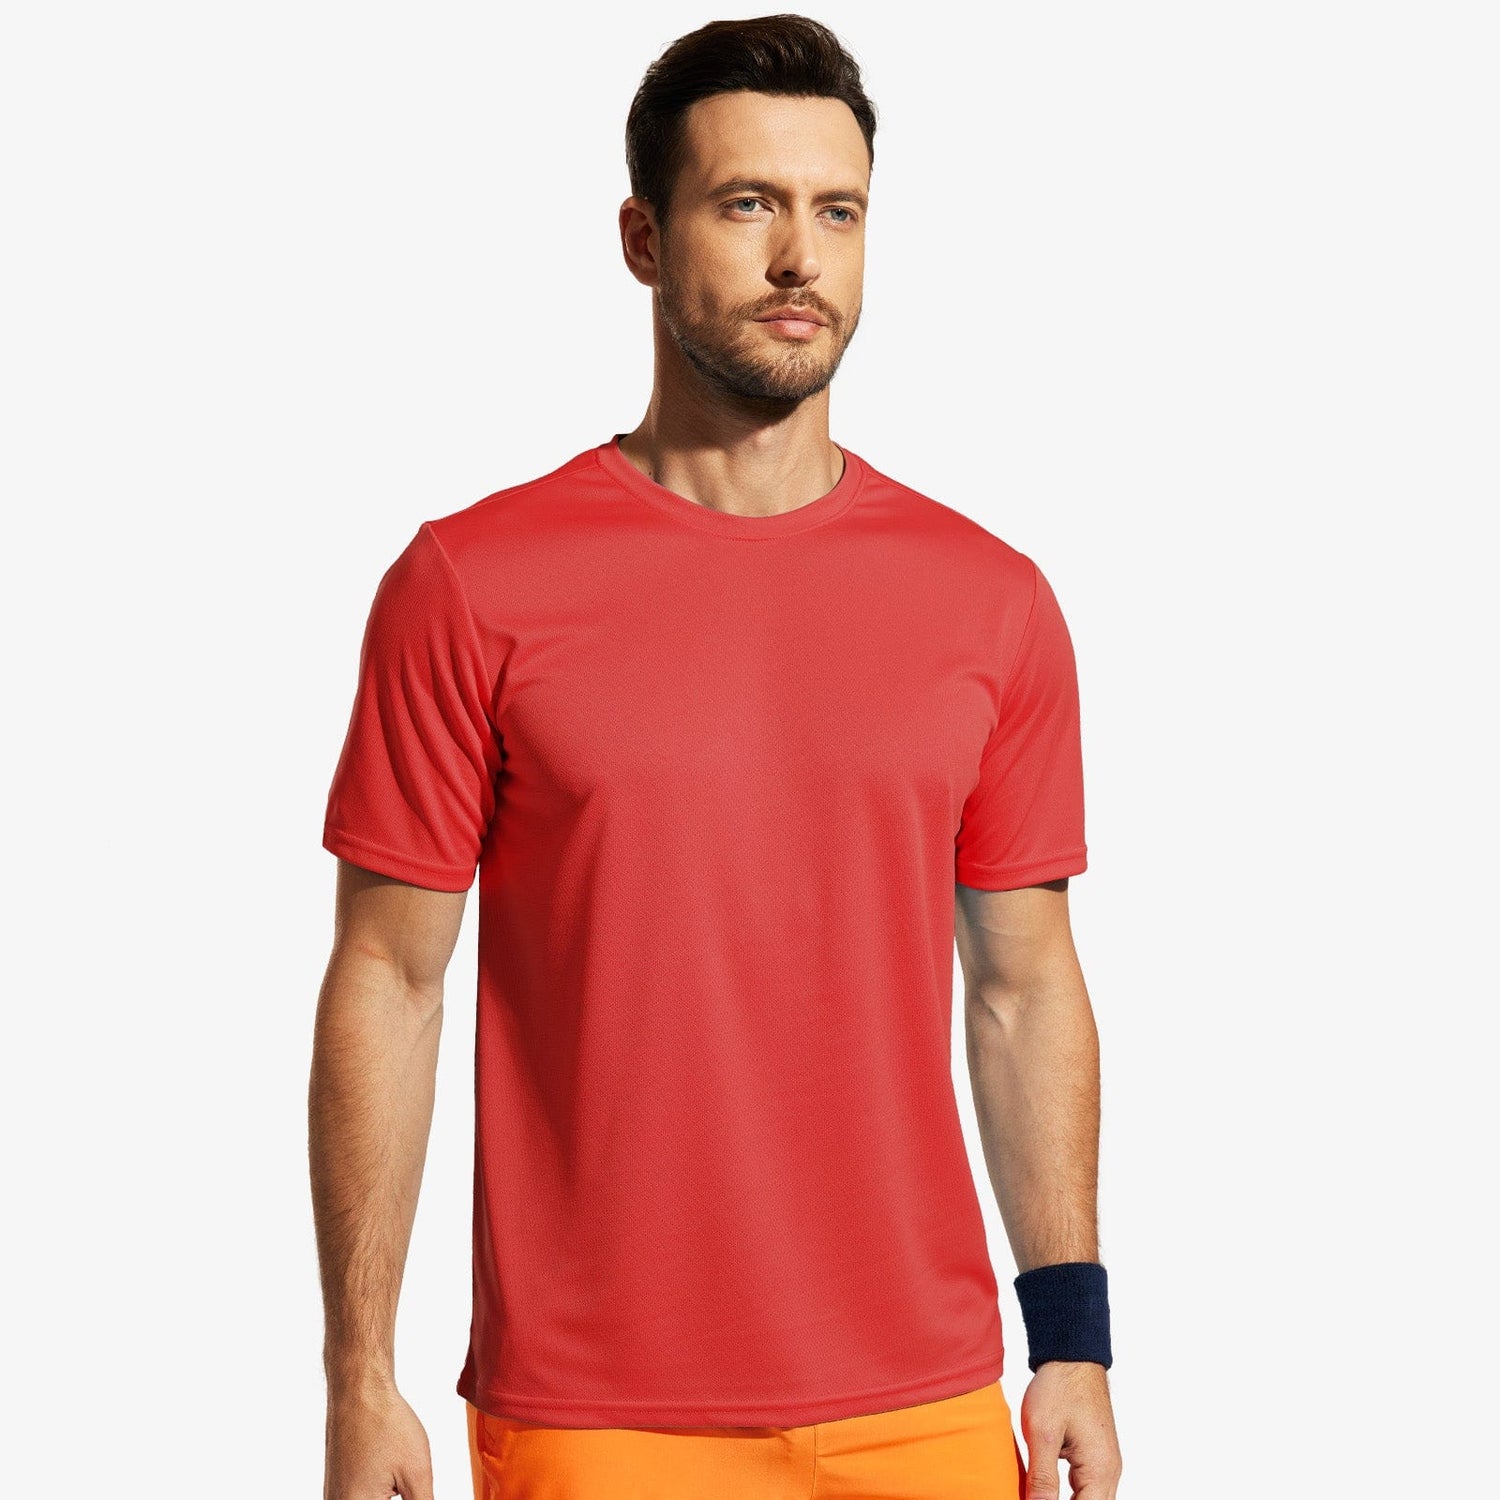 Men Dry Fit Workout T-shirts for Gym Athletic Running Men Shirts Red / S MIER